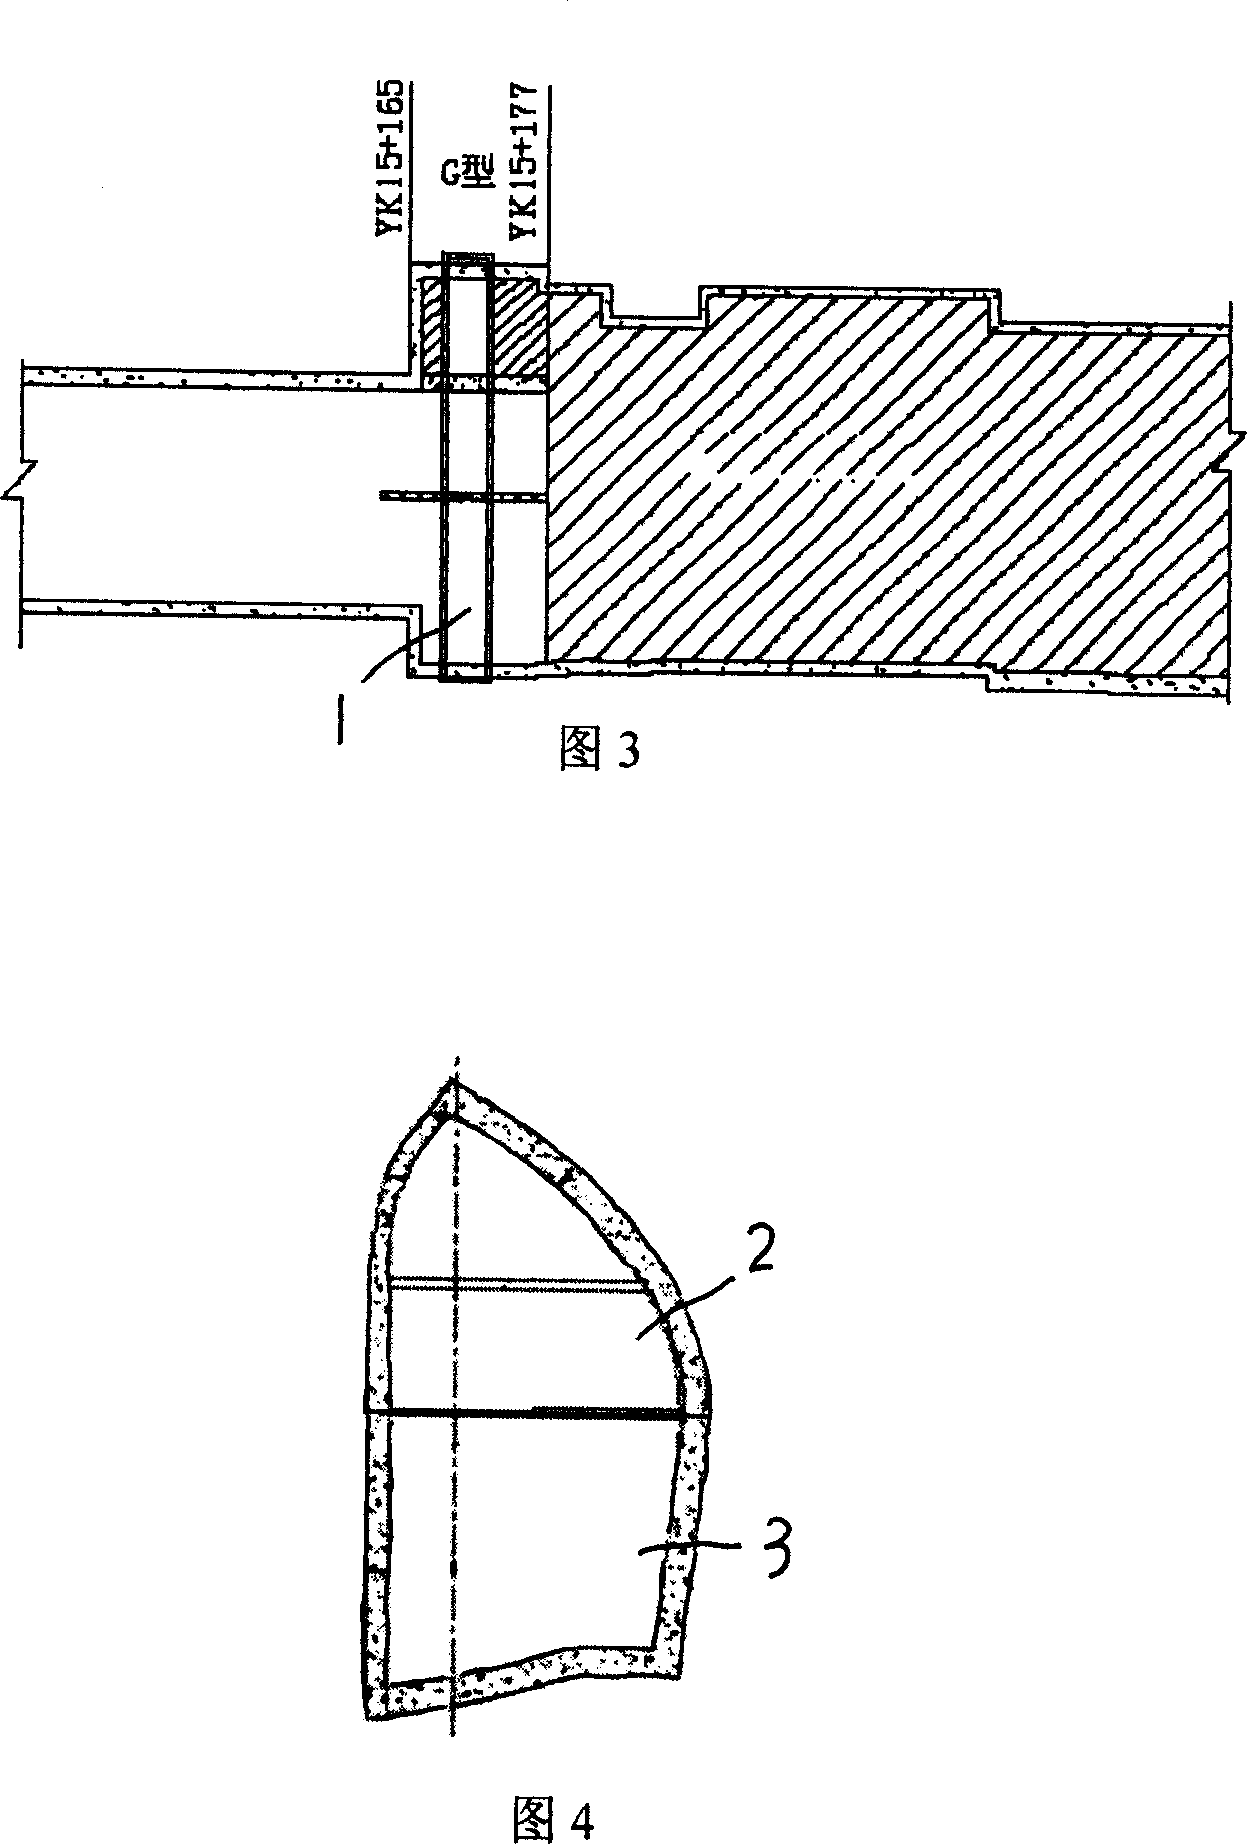 Rapid-construction method for rapid change of small-section into large-section tunnel